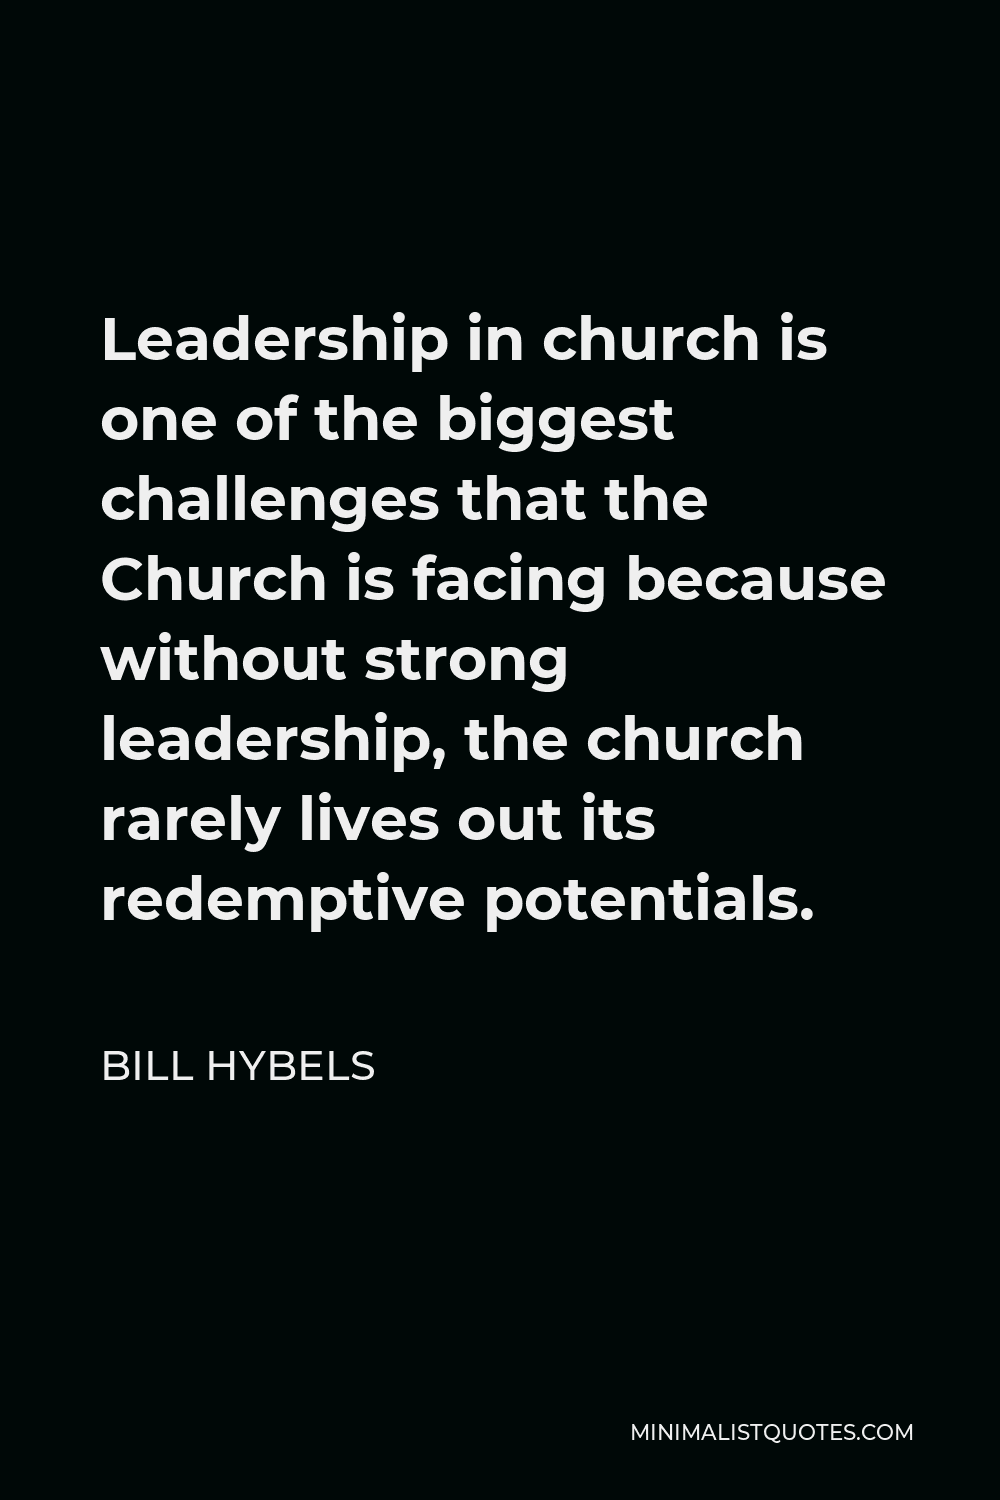 Bill Hybels Quote - Leadership in church is one of the biggest challenges that the Church is facing because without strong leadership, the church rarely lives out its redemptive potentials.